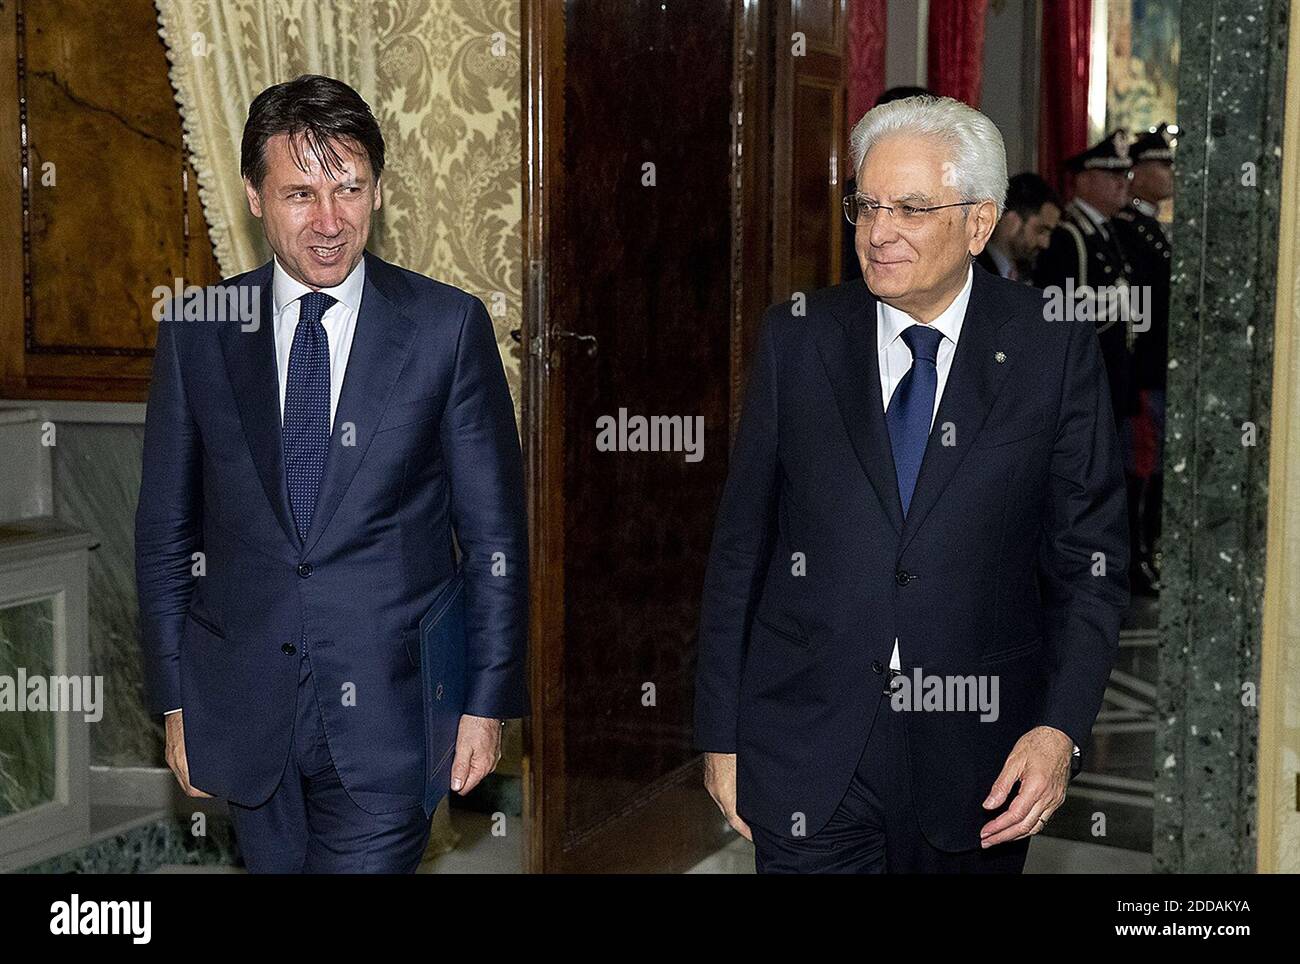 New Italian Prime Minister Giuseppe Conte (L) meets with president Sergio Mattarella at Quirinale palace on May 31, 2018 in Rome, Italy. Conte presented a list of ministers to Mattarella and the new government will be sworn in the next day. Photo by ABACAPRESS.COM Stock Photo